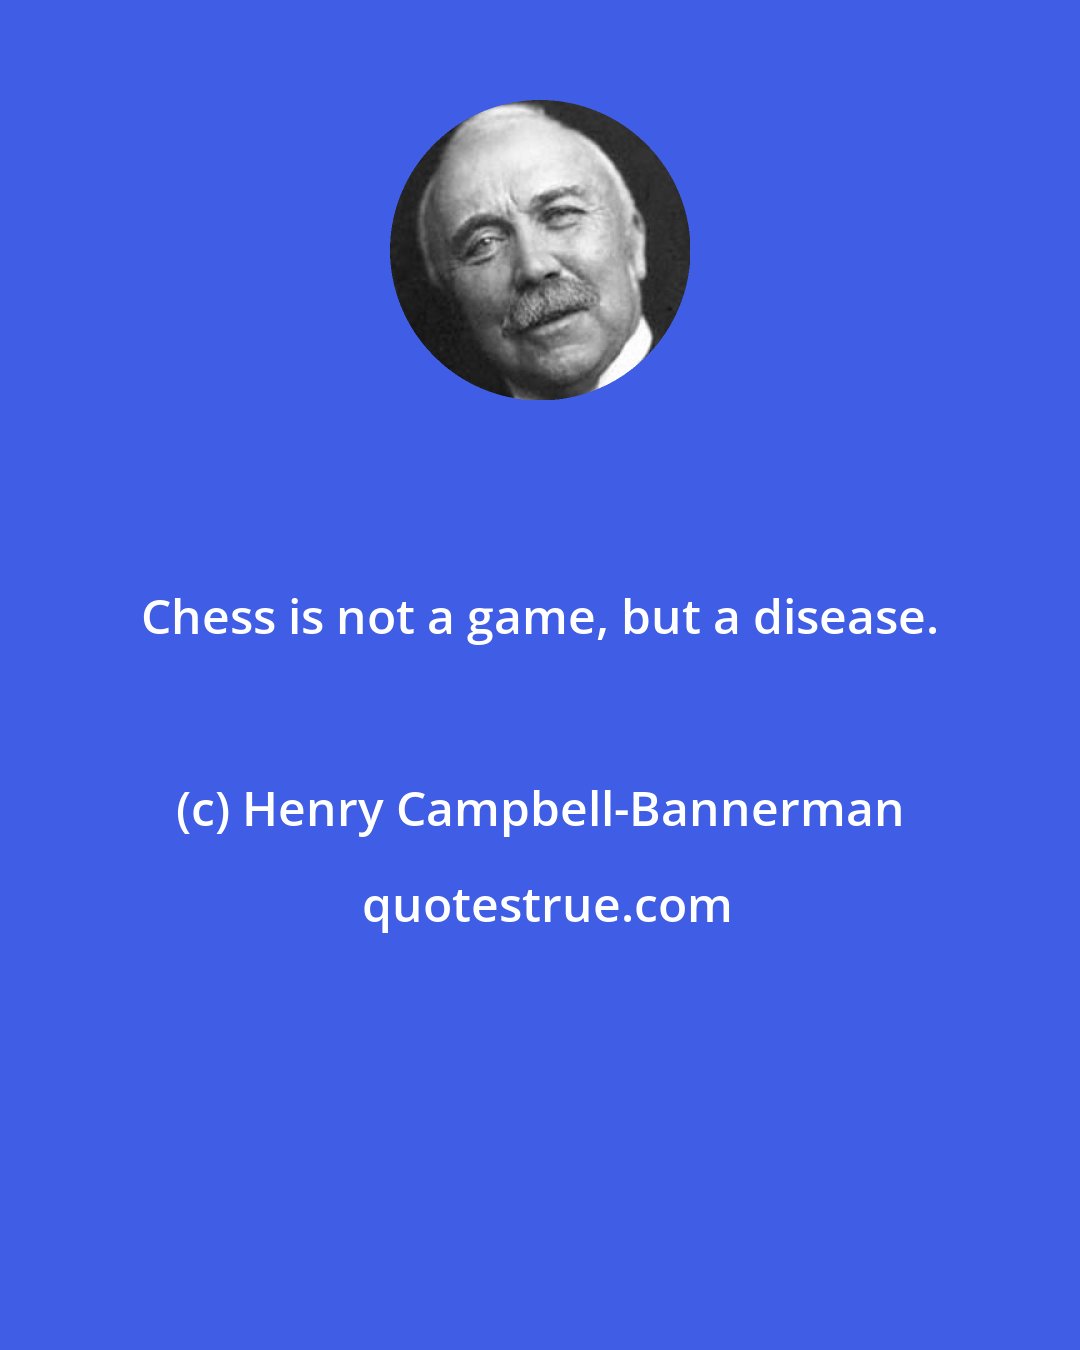 Henry Campbell-Bannerman: Chess is not a game, but a disease.